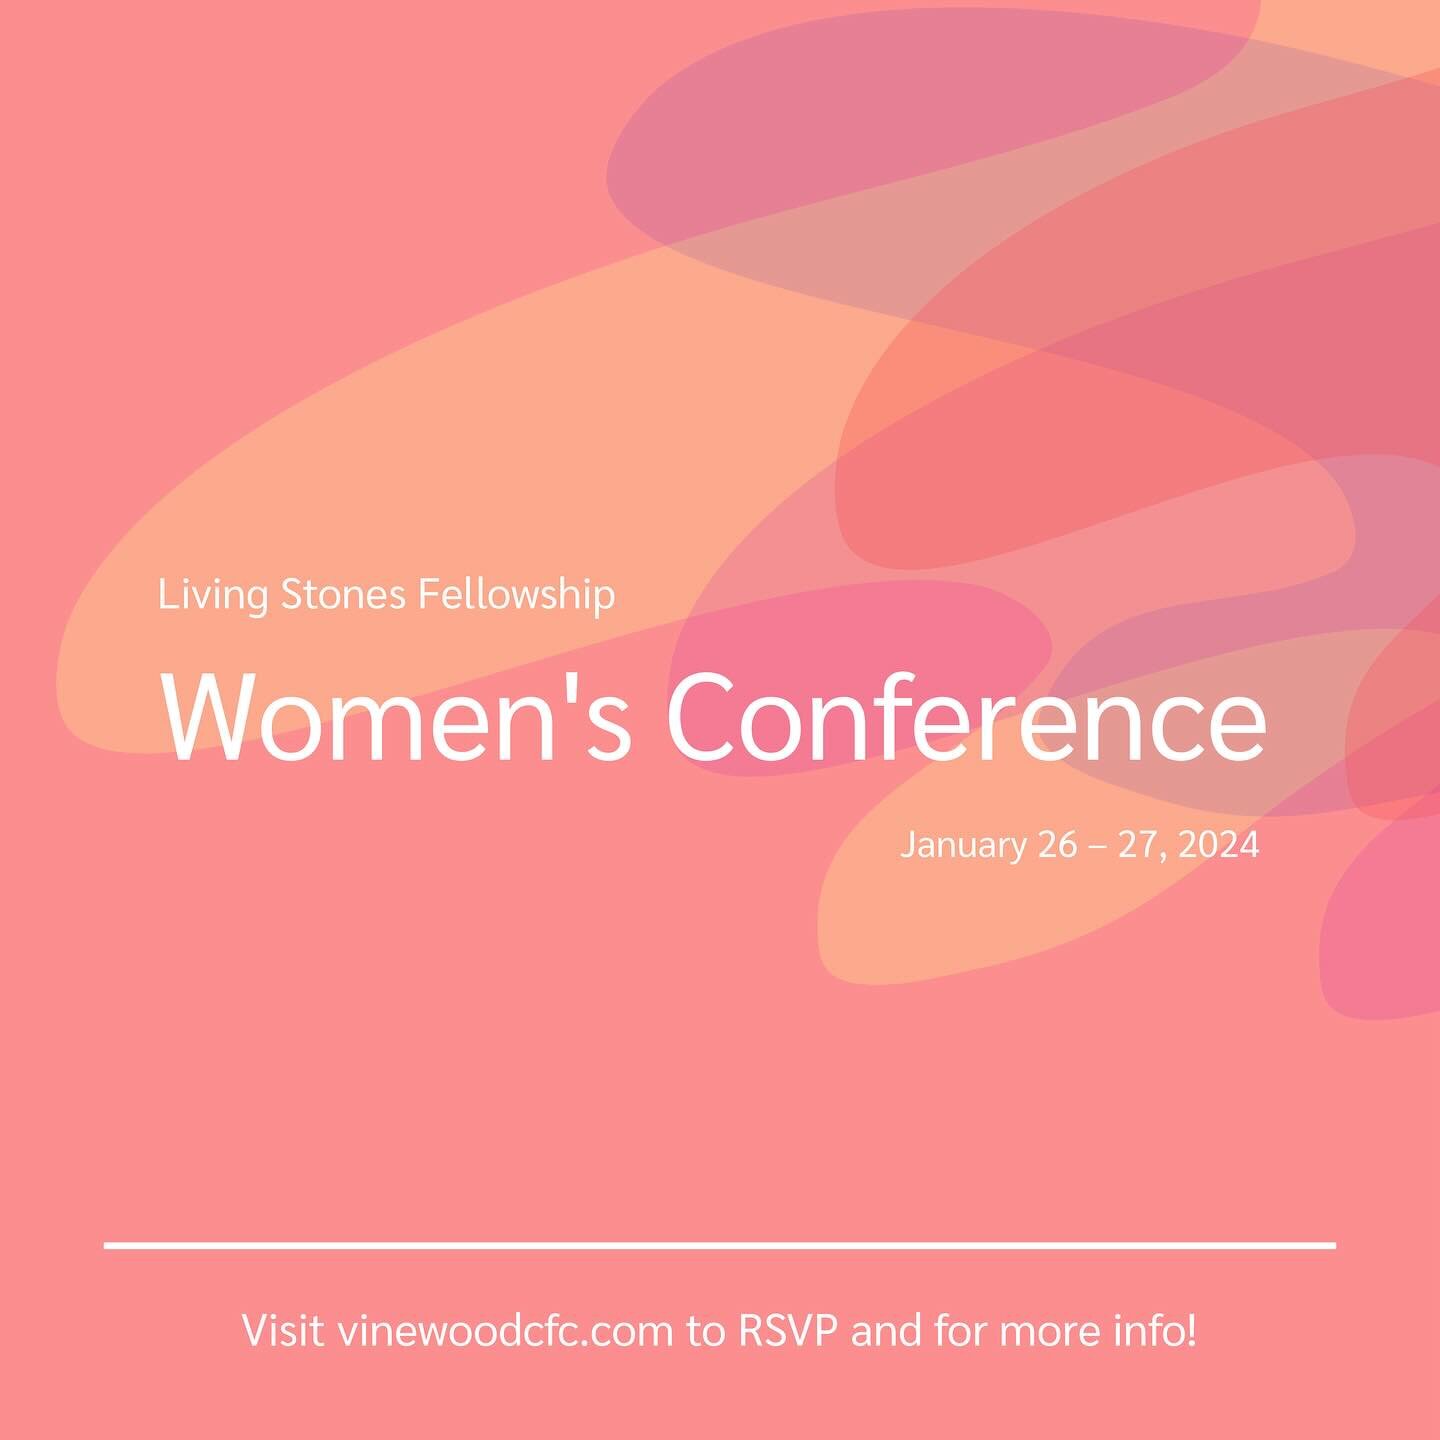 We are super excited to host Sylvia Park from True North Church in Palo Alto and Audrey Ang from North Creek Church in Walnut Creek for our upcoming LSF Women&rsquo;s conference, Jan 26-27. They will be speaking on identity in Christ and how it affec